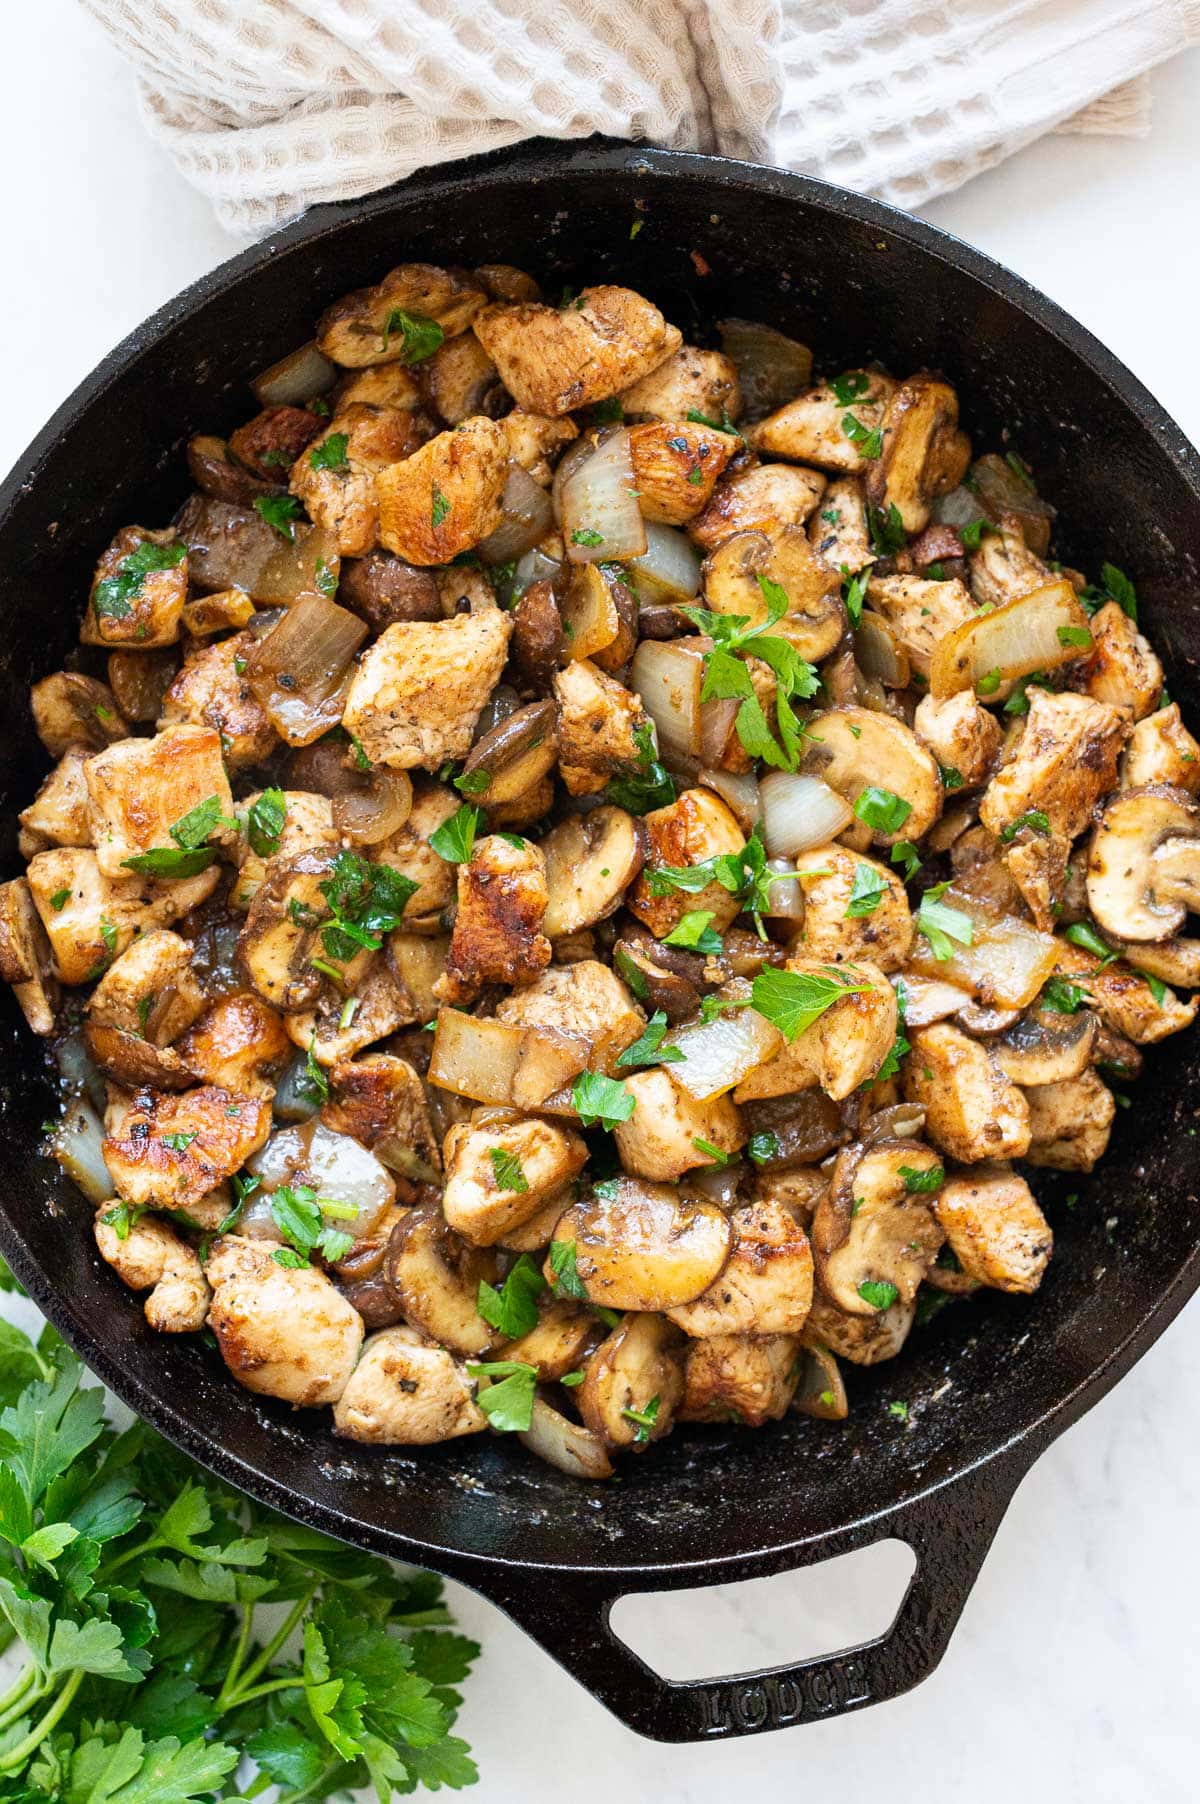 Sauteed chicken and mushrooms garnished with parsley in a skillet.